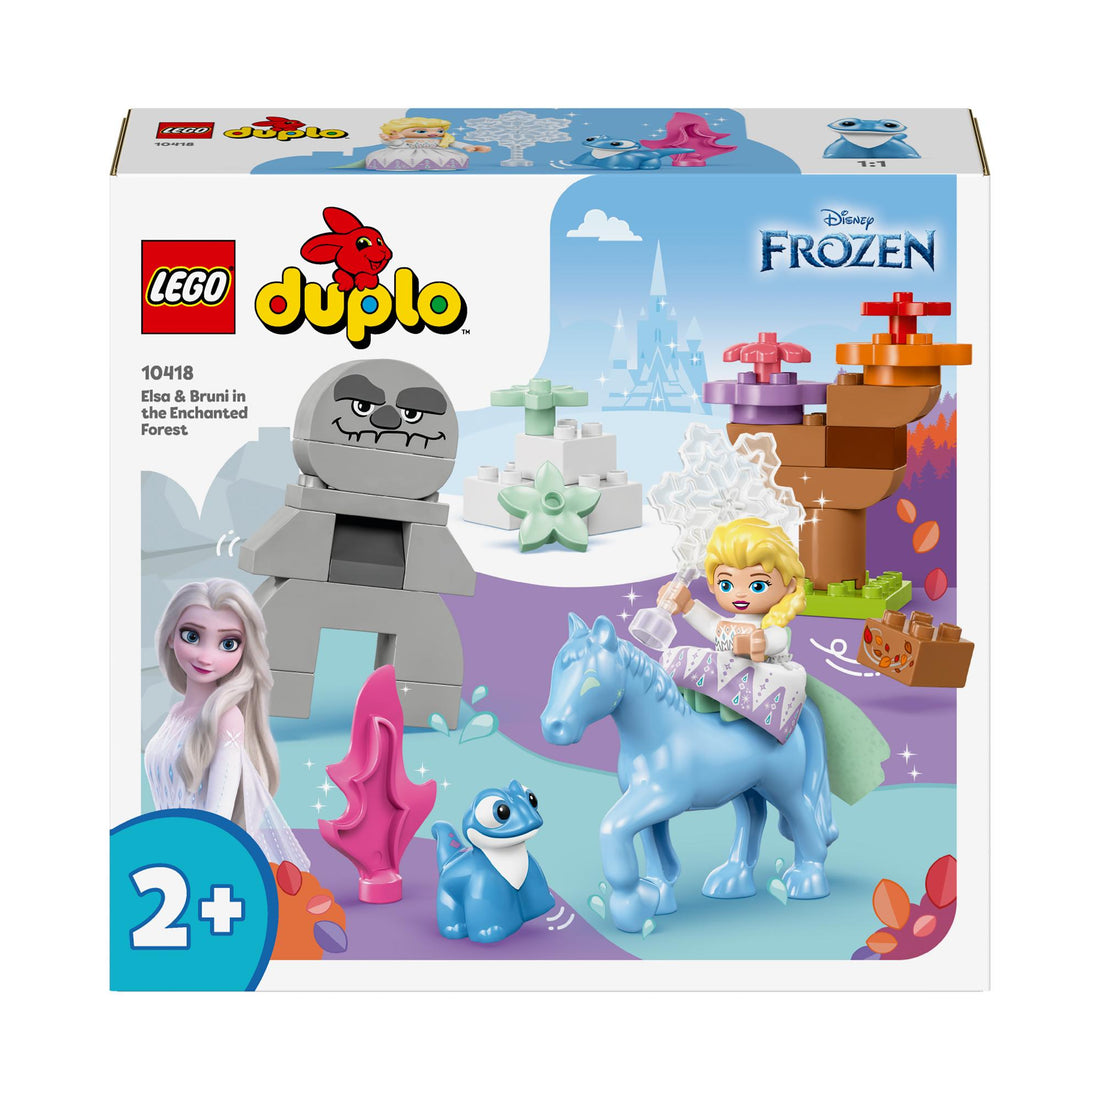 Duplo - Elsa and Bruni in the enchanted forest